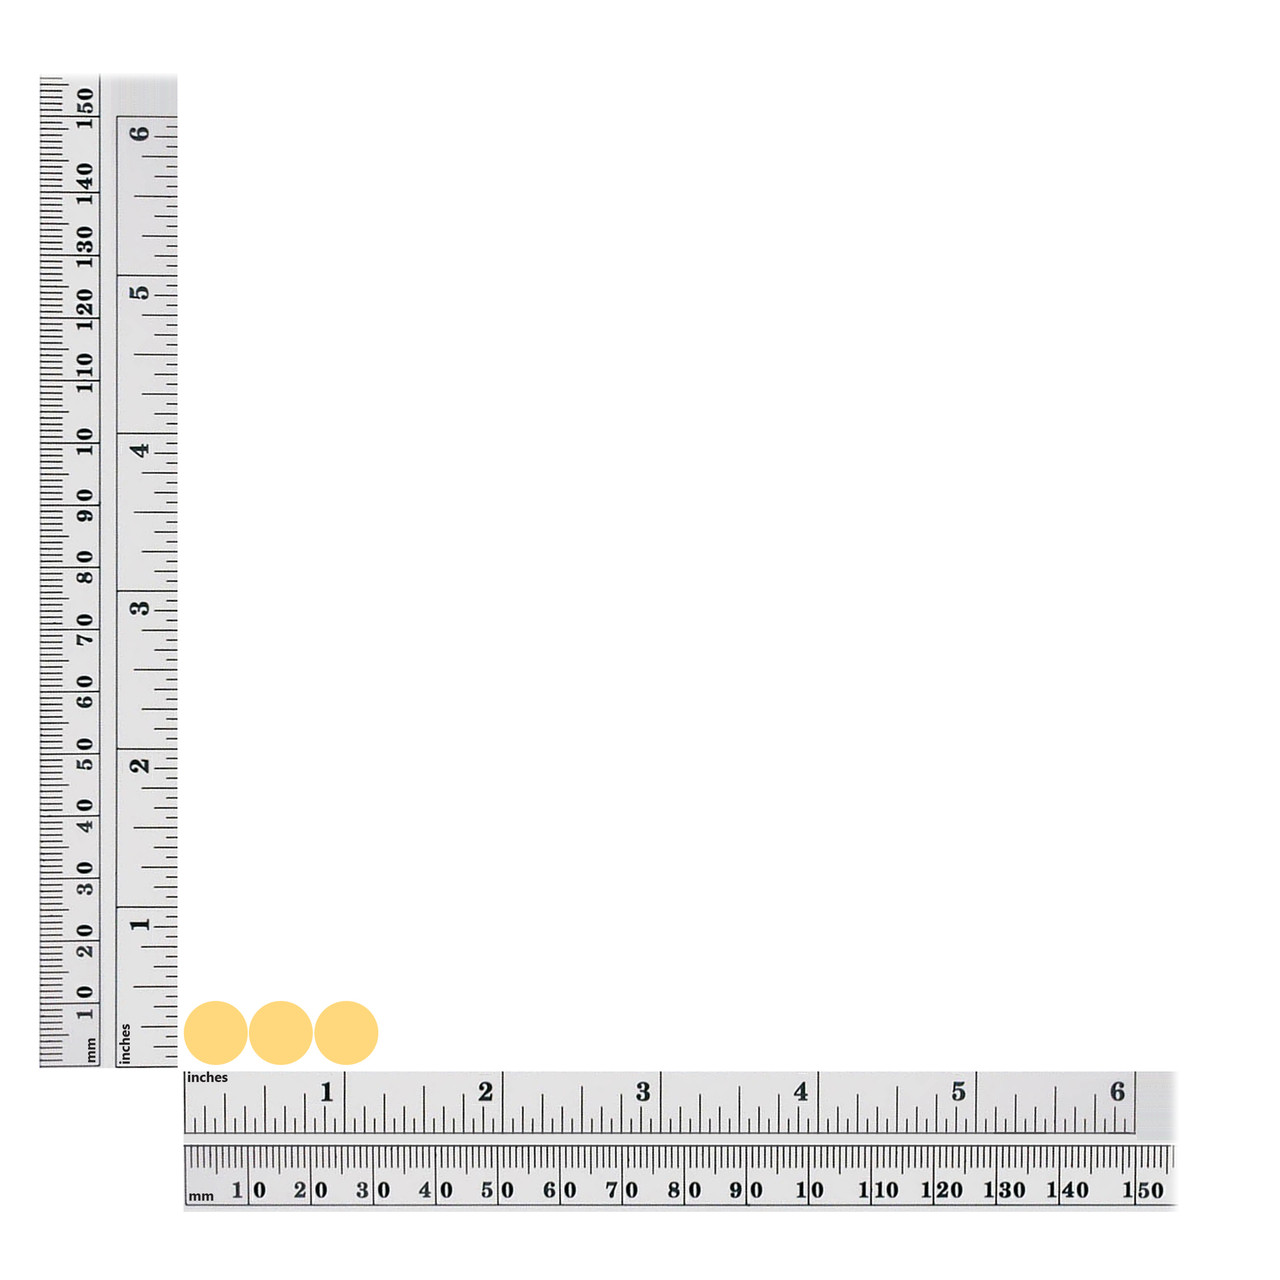 10mm Cup Sequins Size Chart